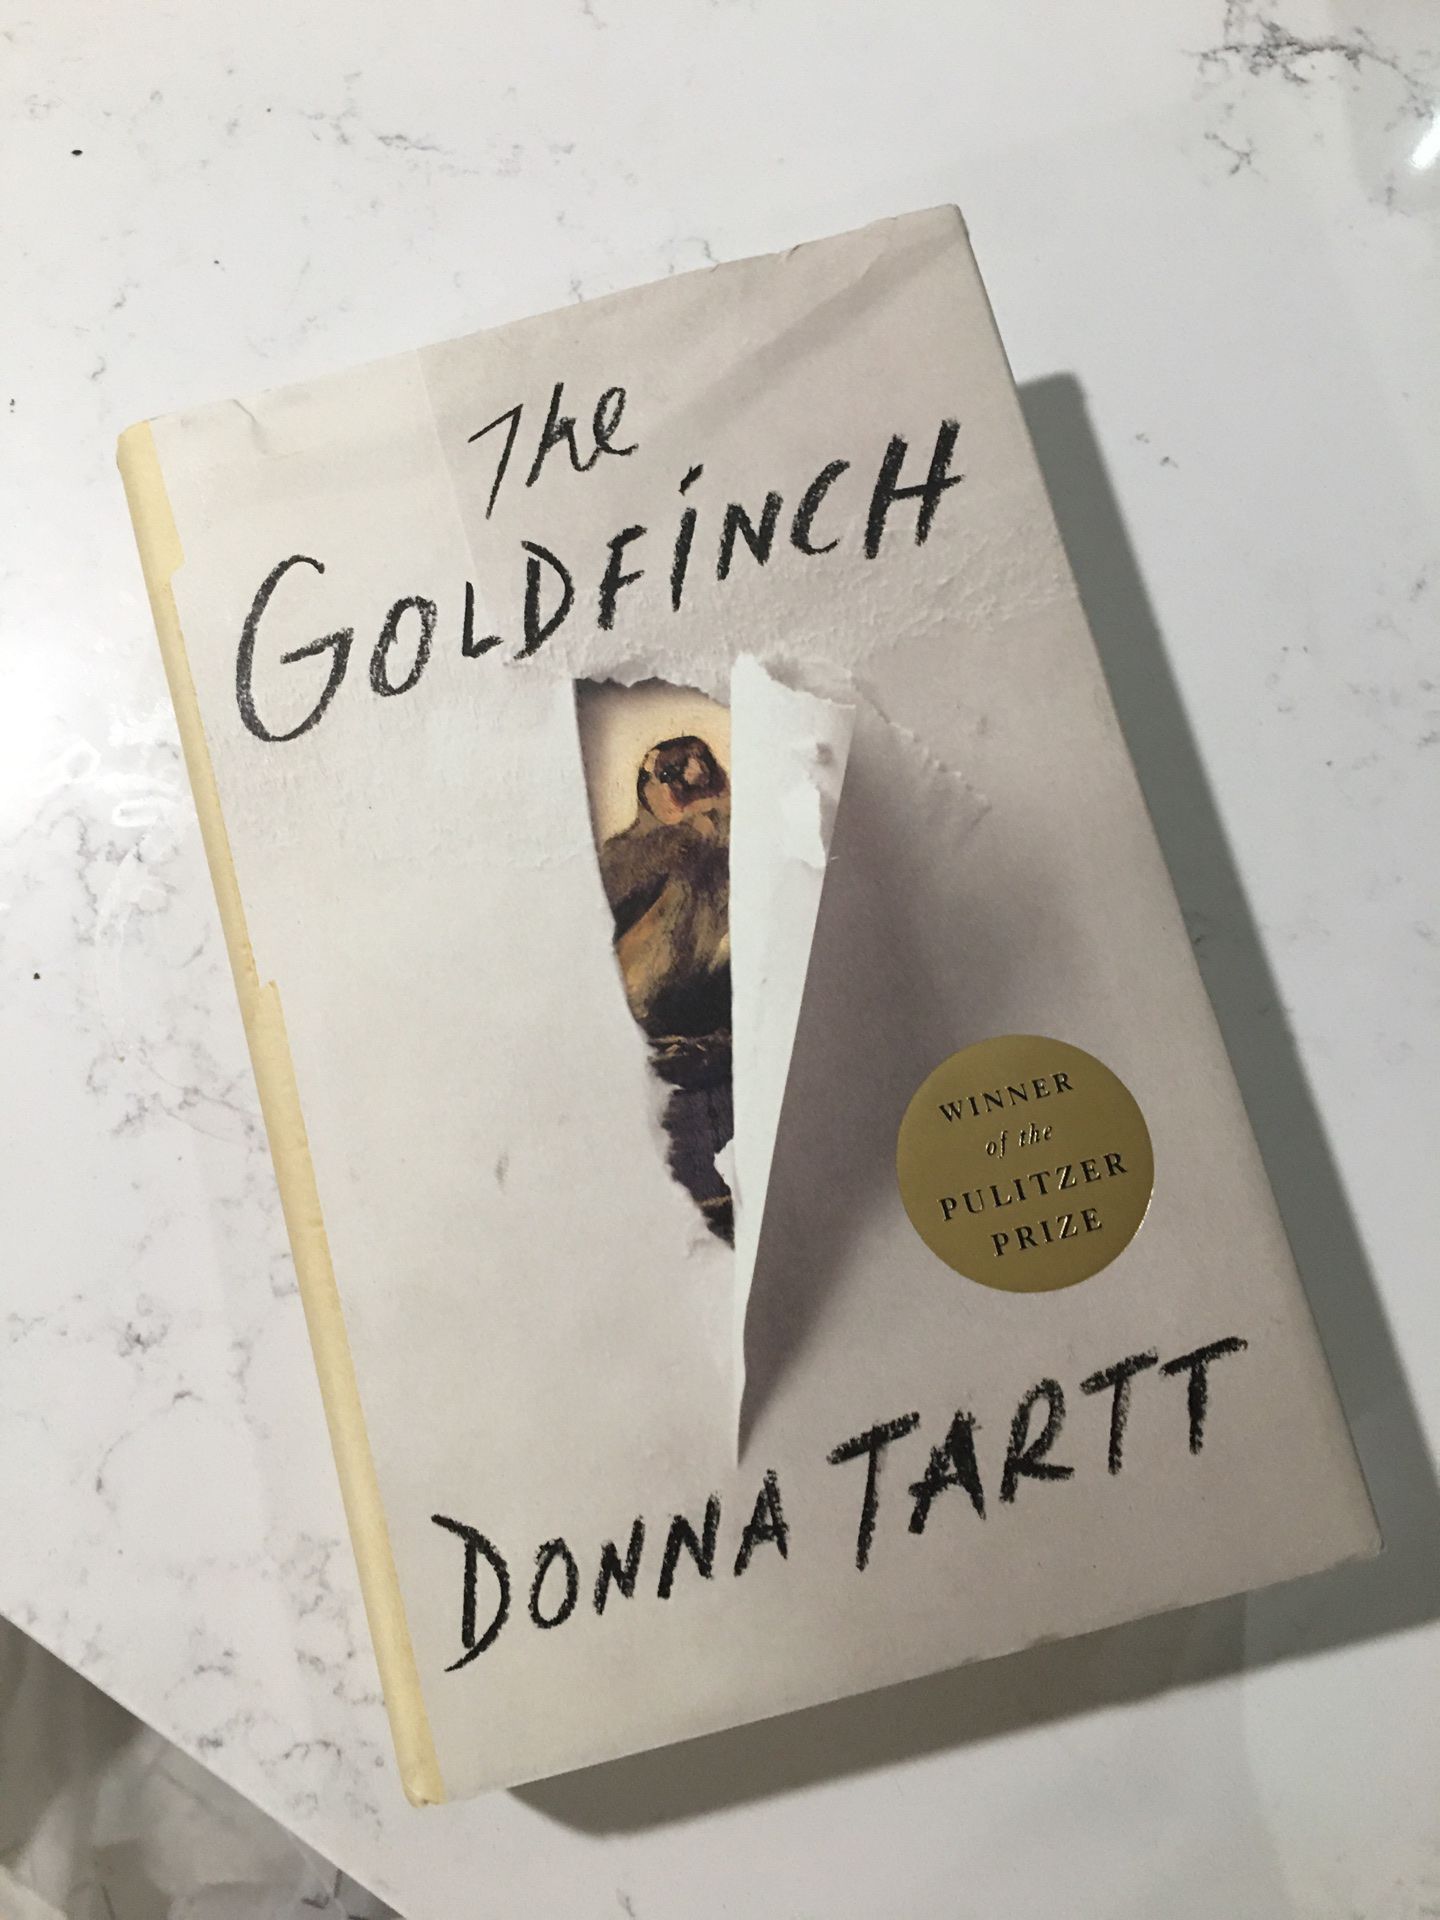 The Goldfinch paperback $5